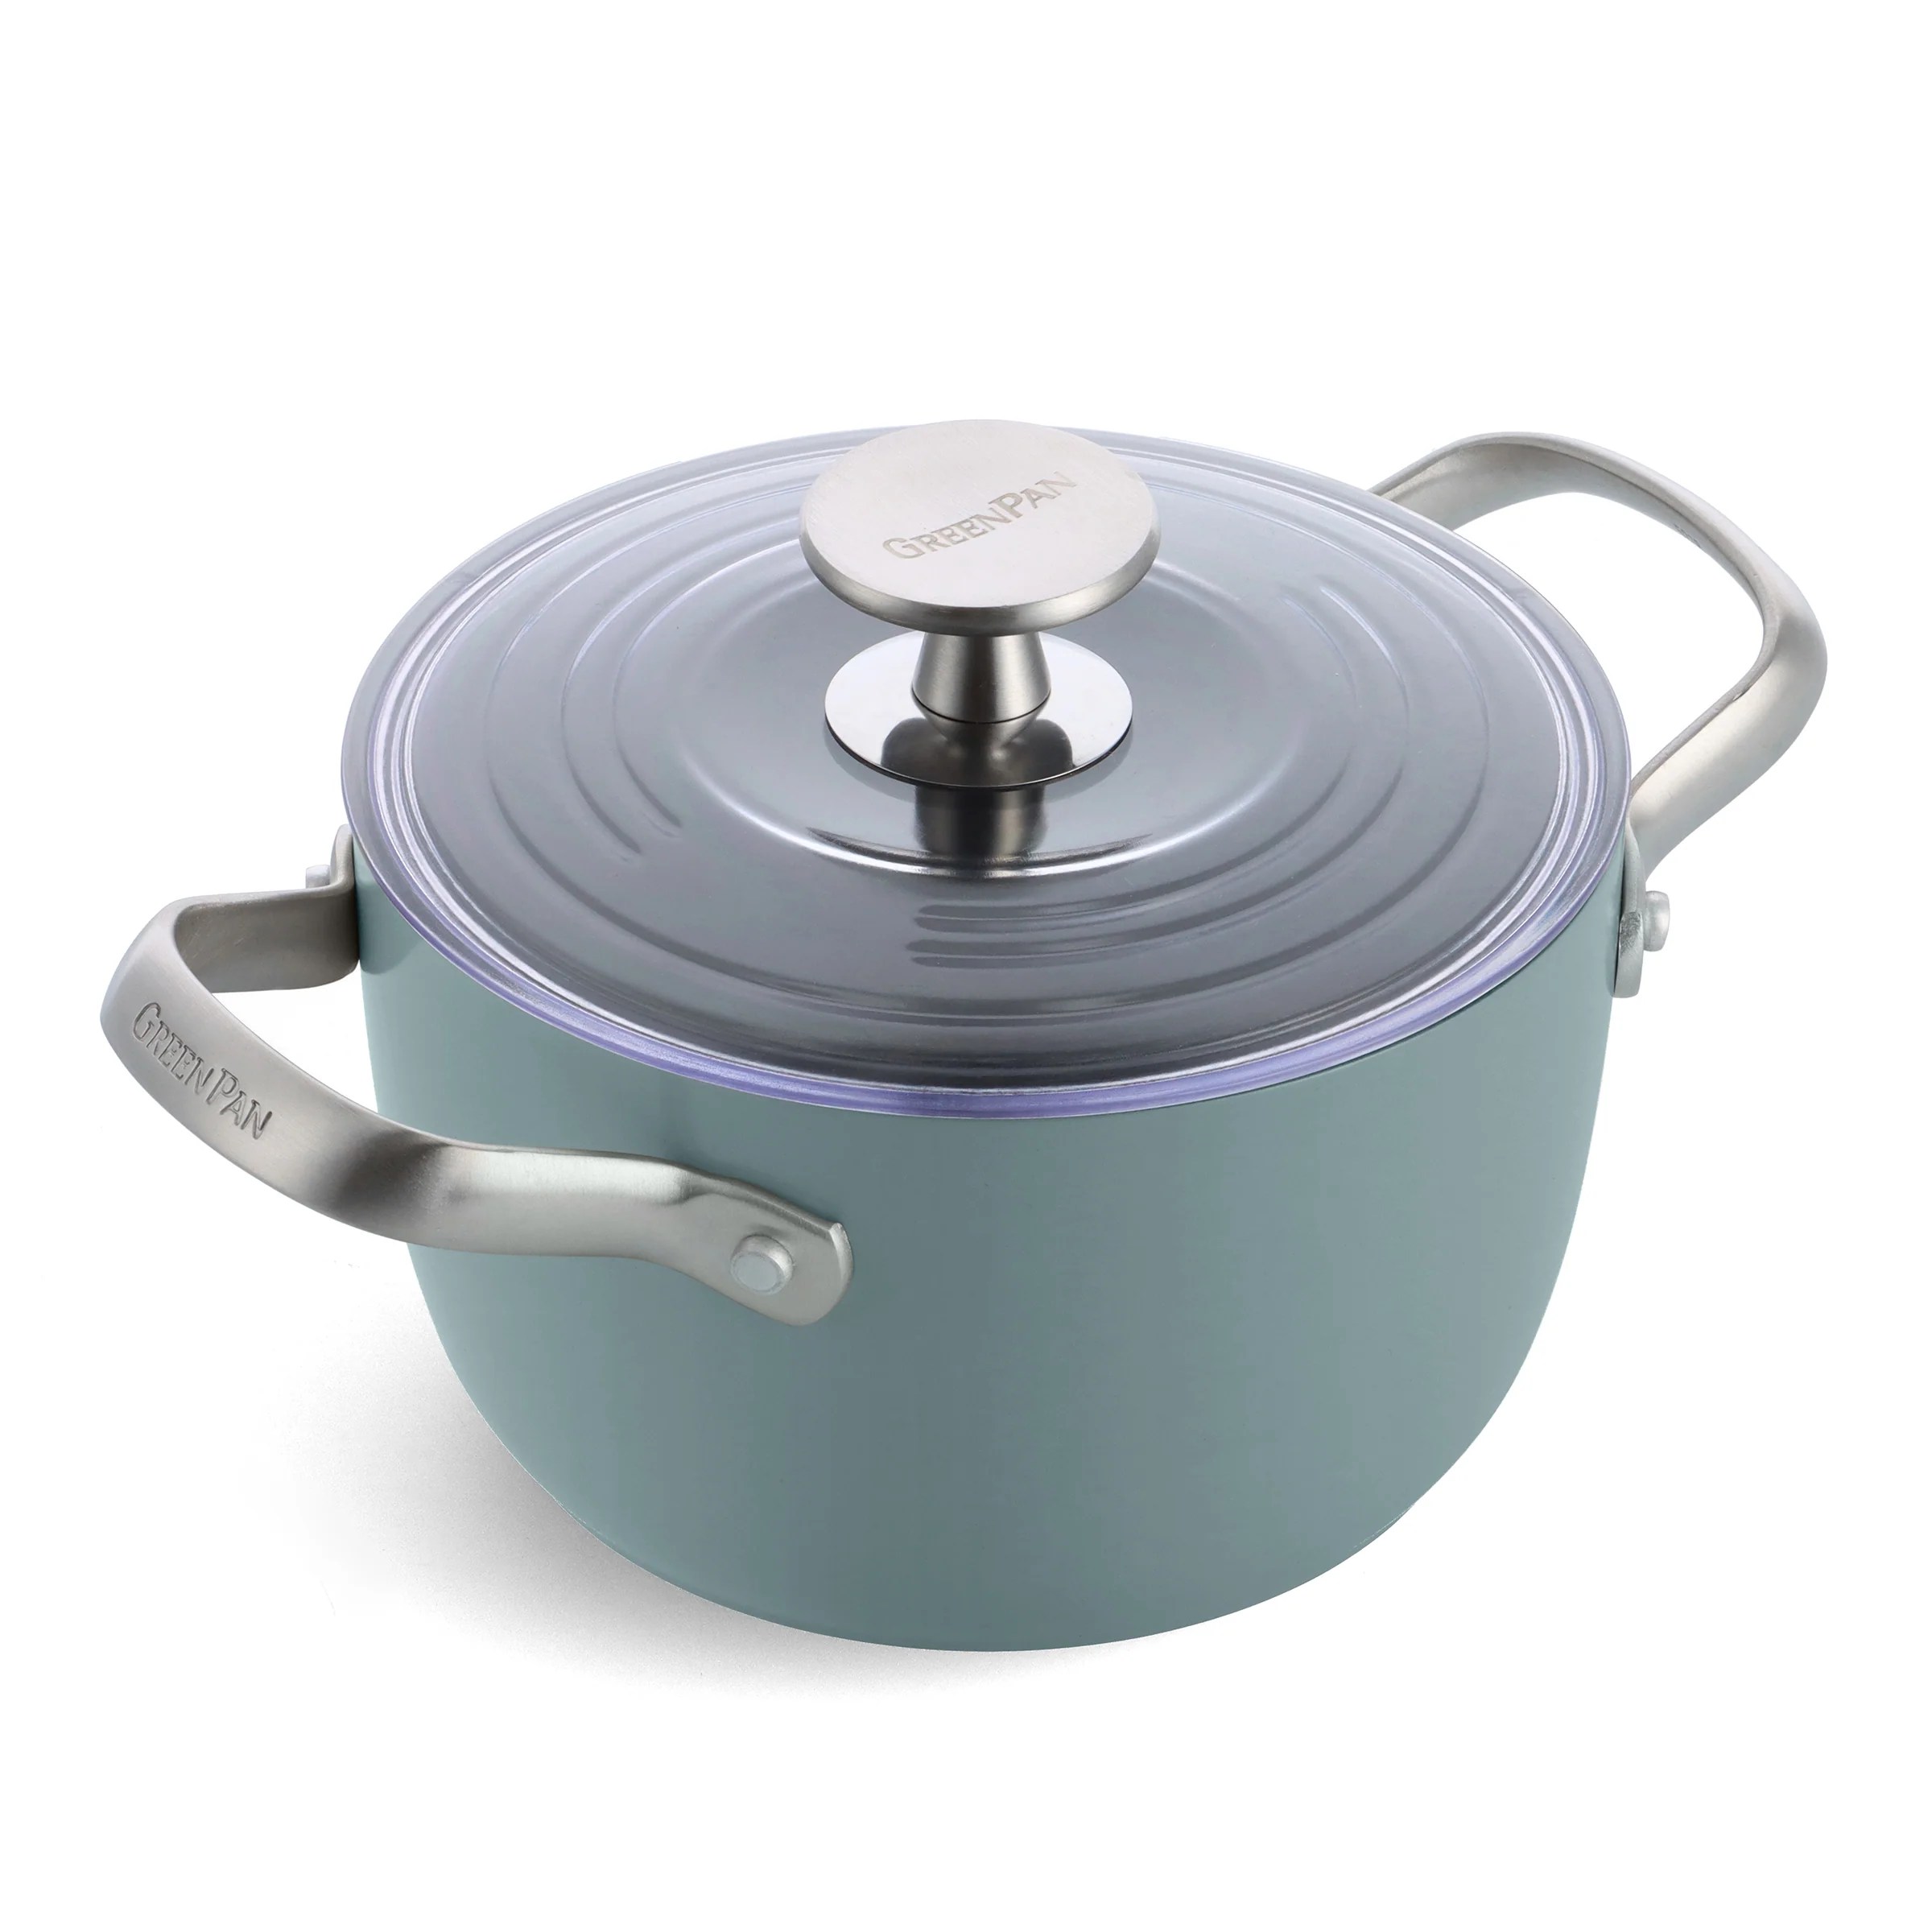 A teal GreenPan rice and grains cooker, on sale for thanksgiving